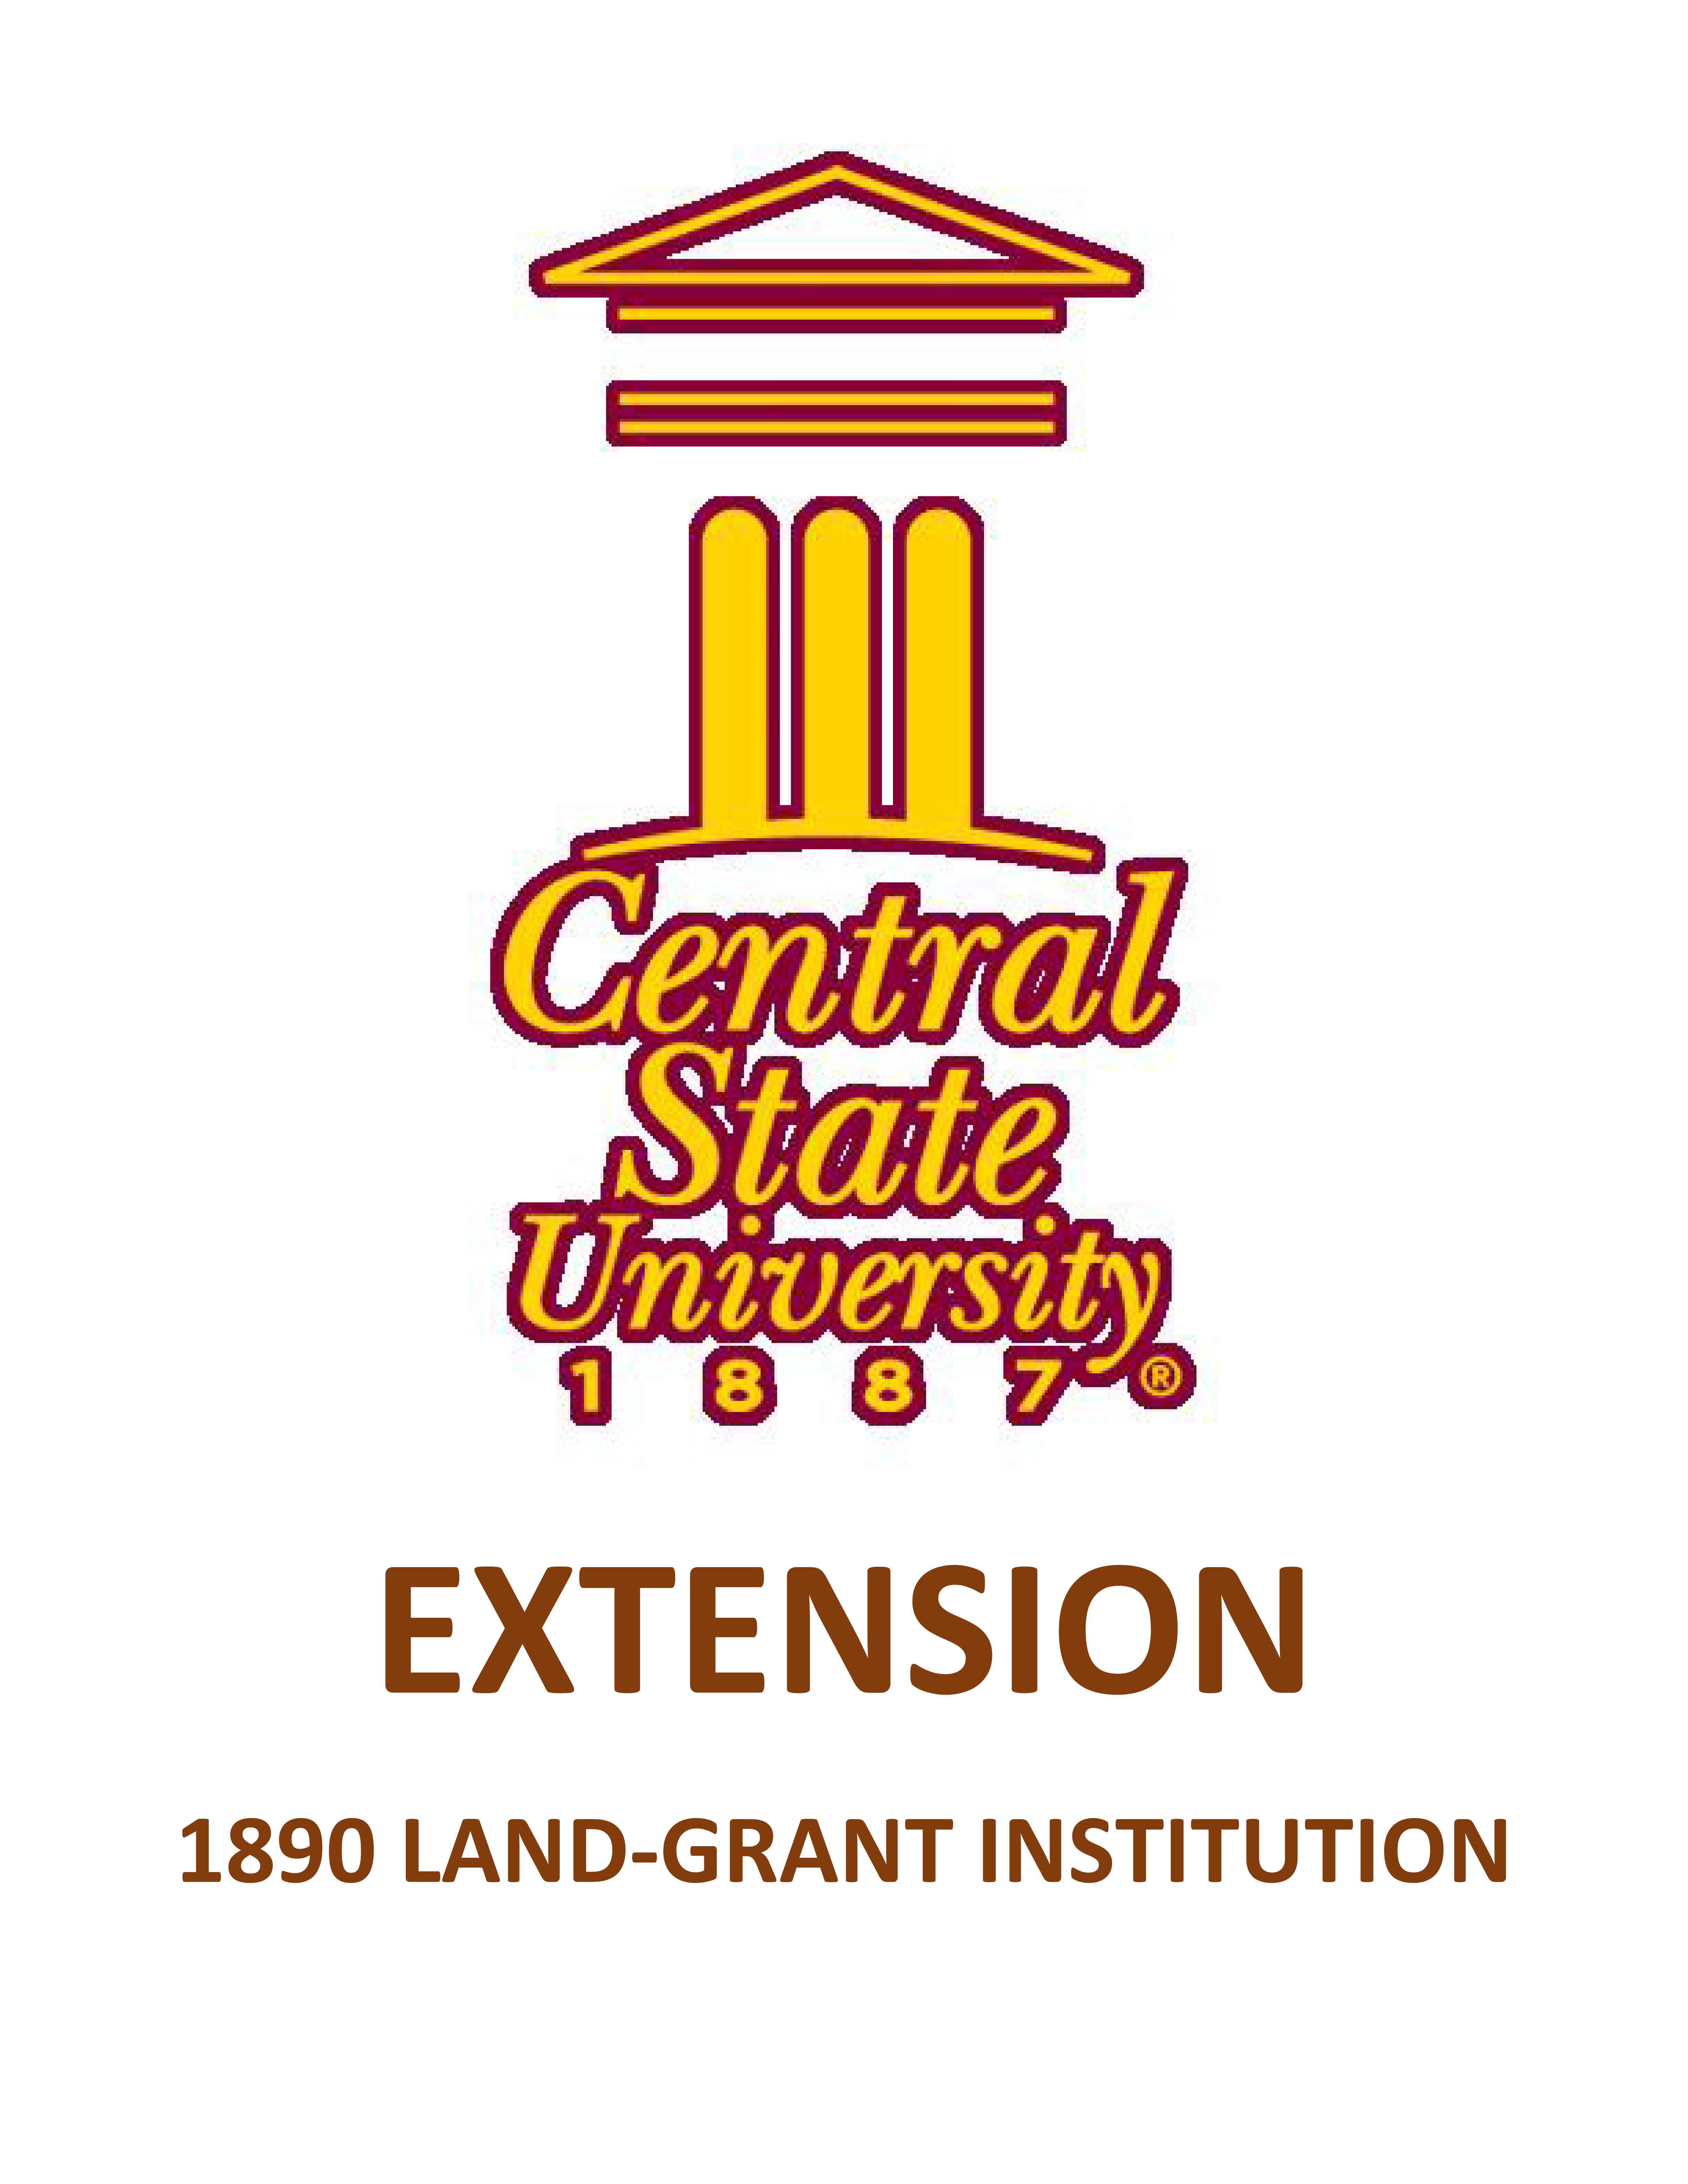 Central State University Workshop Getting Started with Planning Your Crops | January 18, 2022